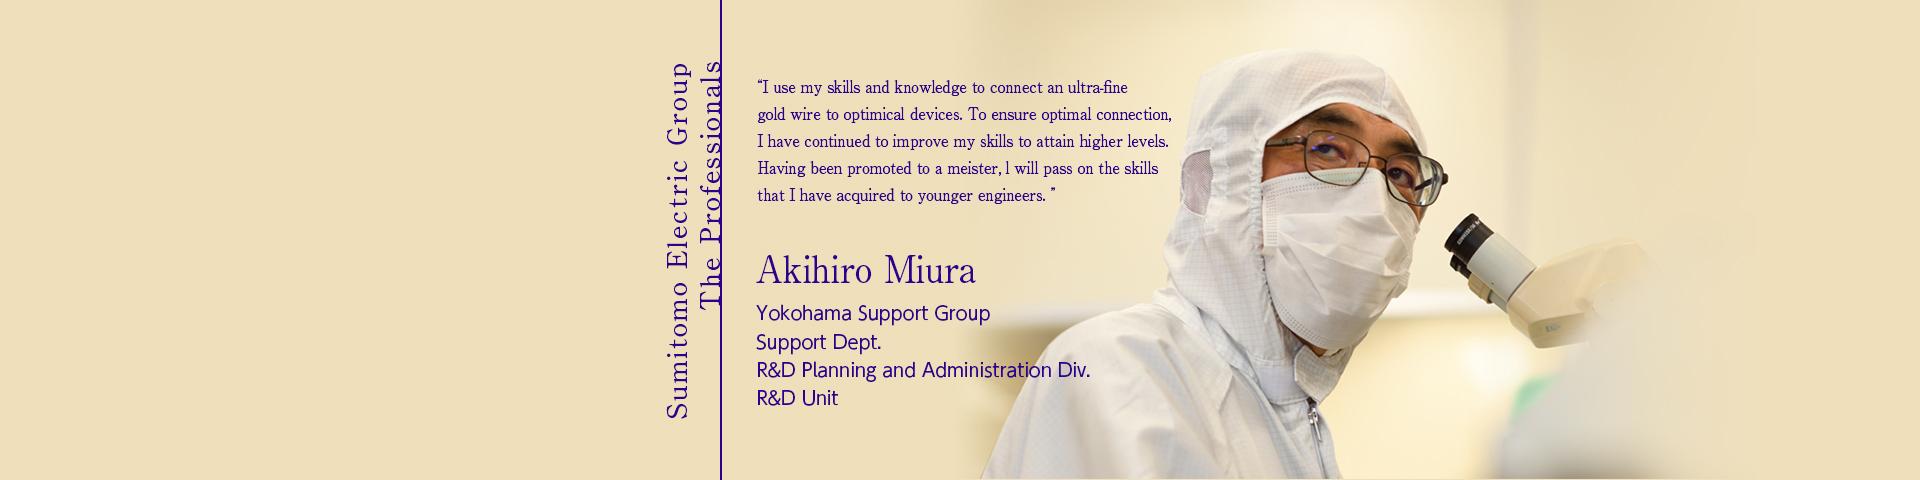 Sumitomo Electric Group The Professionals ~Akihiro Miura Yokohama Support Group Support Dept. R&D Planning and Administration Div. R&D Unit~ 